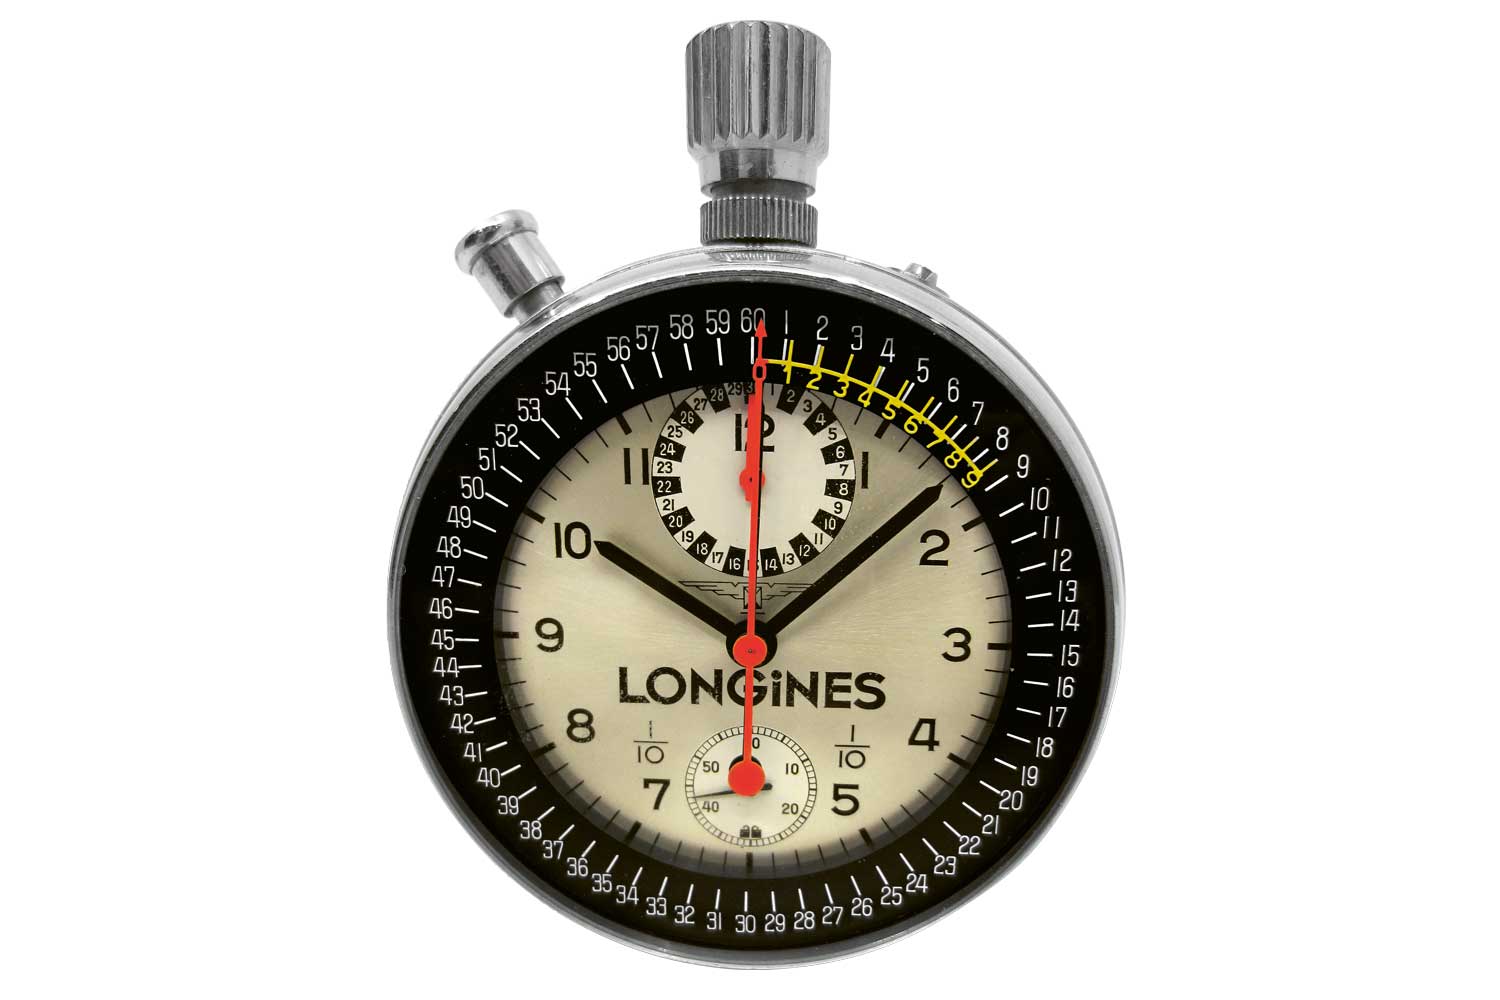 1957 — Professional high-beat and split-second chronograph to time 1/10th of a second (Caliber 260)